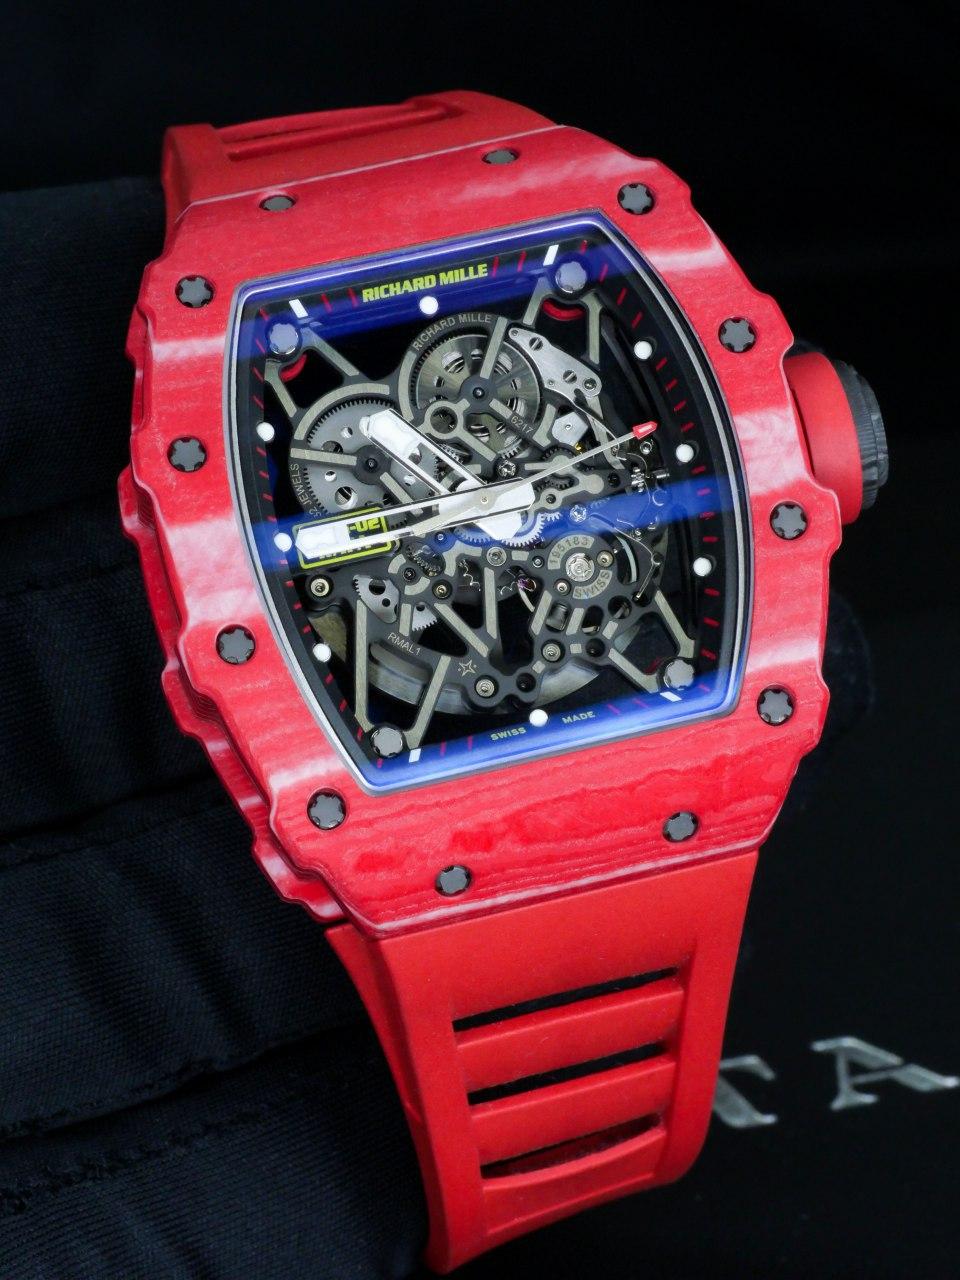 Richard Mille RM 035-02 Rafael Nadal

Richard Mille created this exotic watch for tennis superstar Rafael Nadal in red Quartz-TPT,  an exclusive material made only for Richard Mille. 

The case measures 49.94 mm at the case center and 44.5 mm where